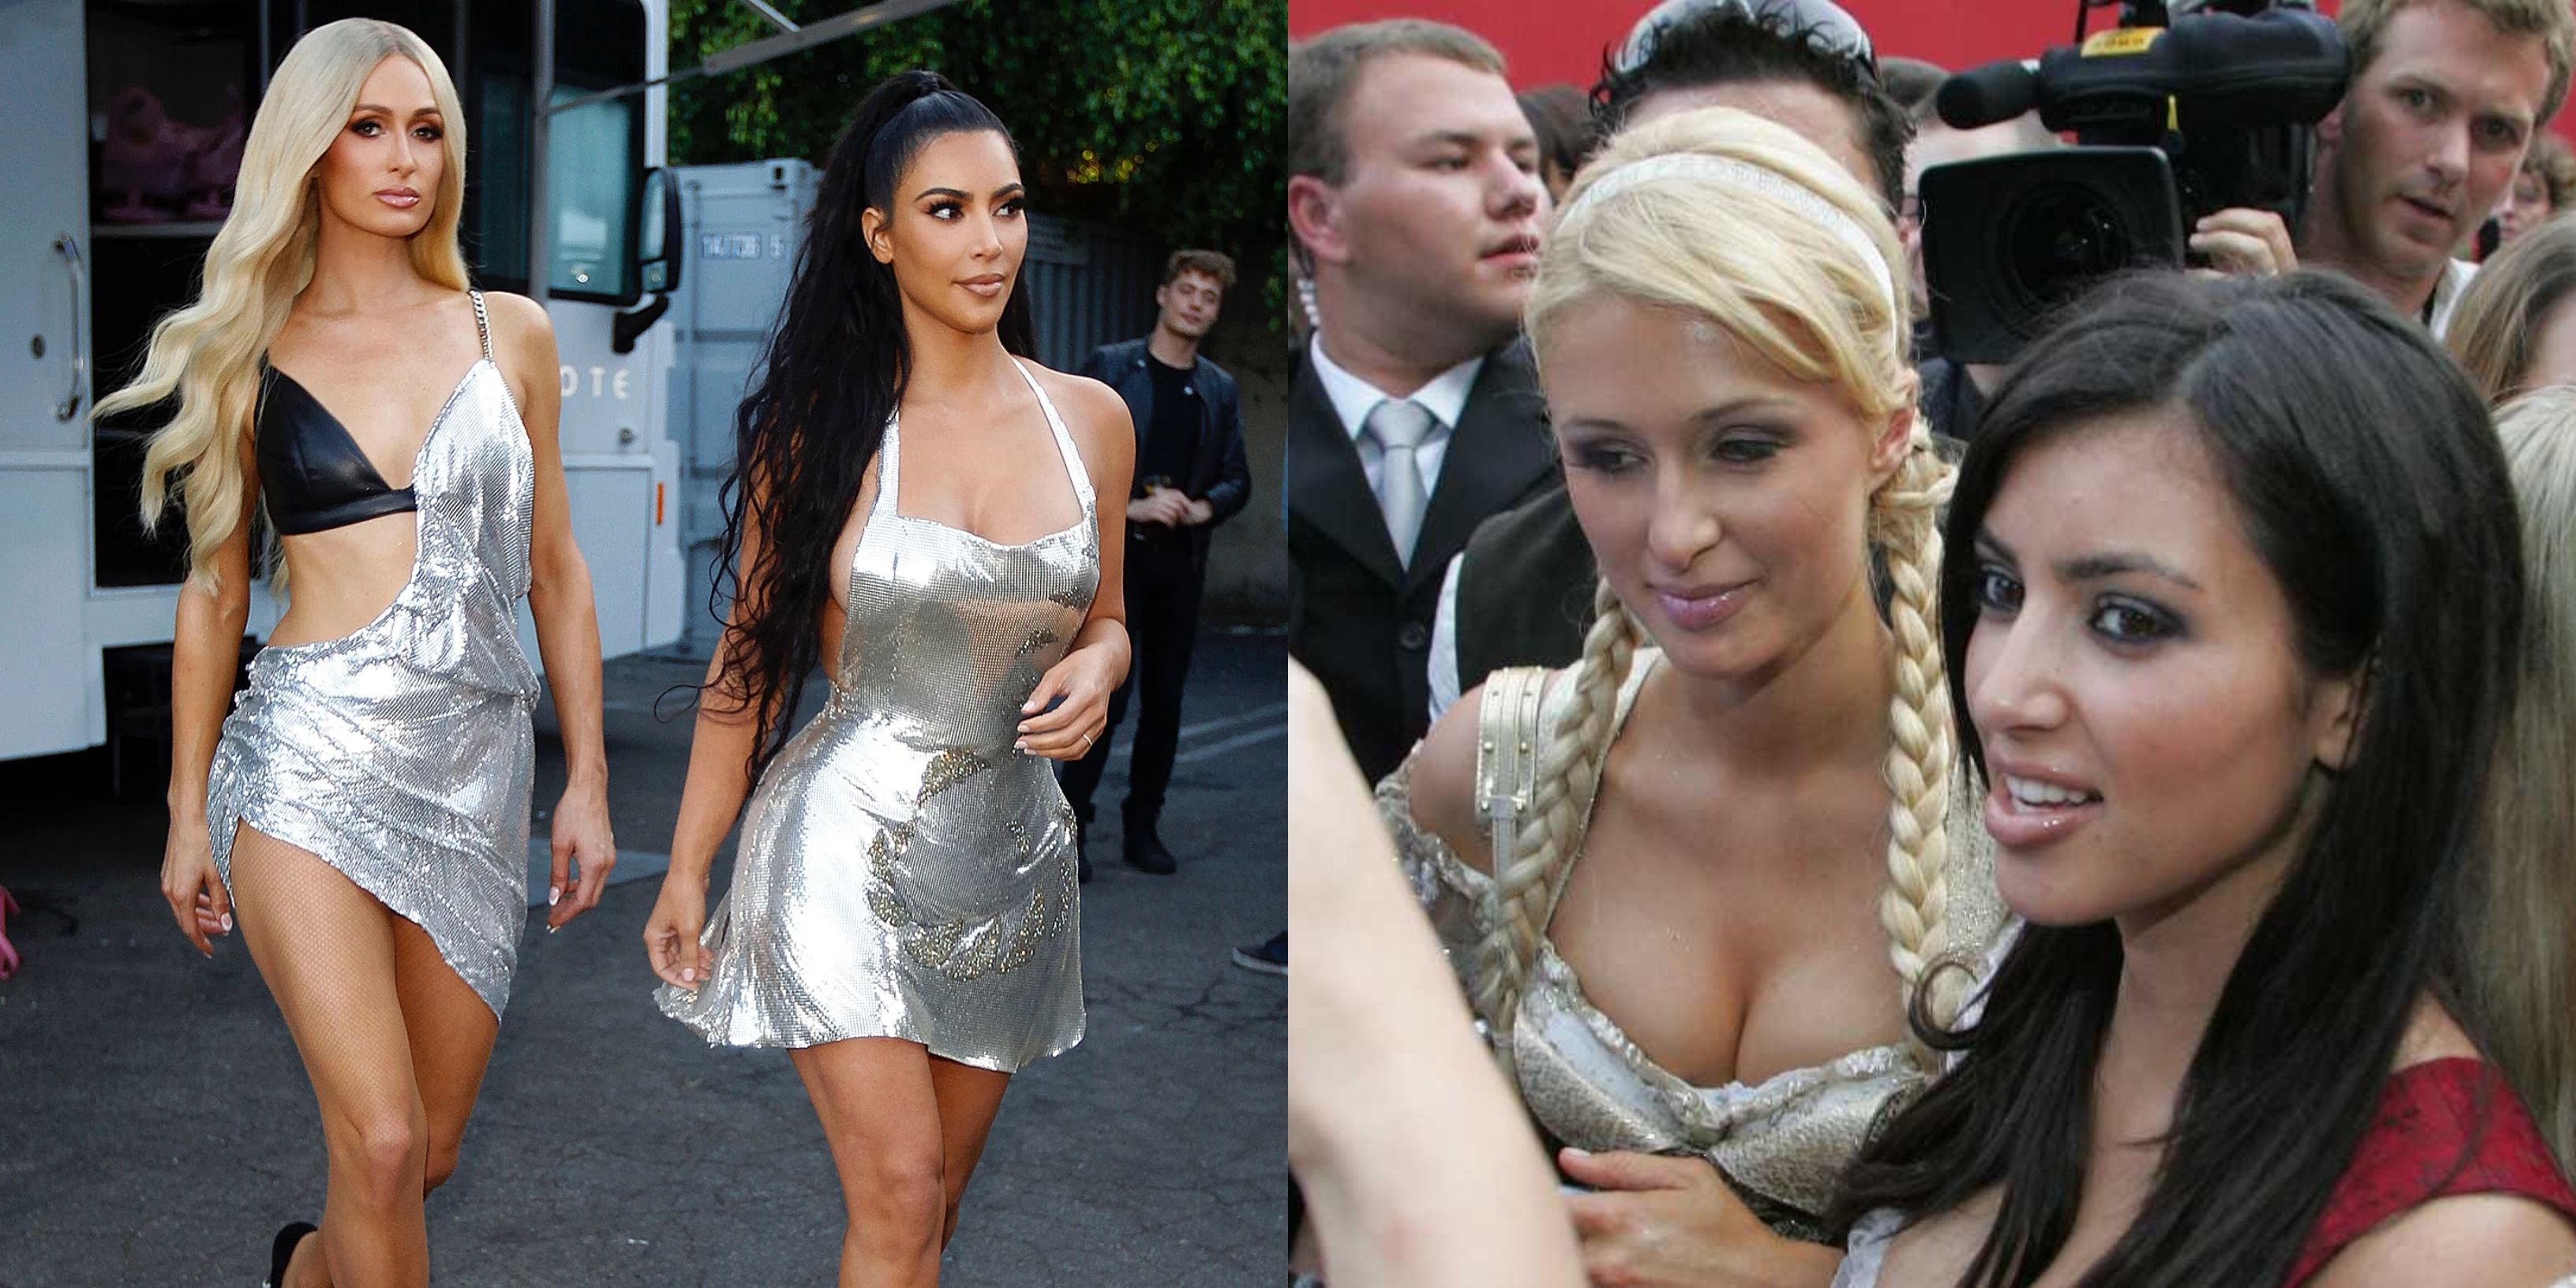 Kim Kardashian and Paris Hilton Almost Dressed as Themselves for